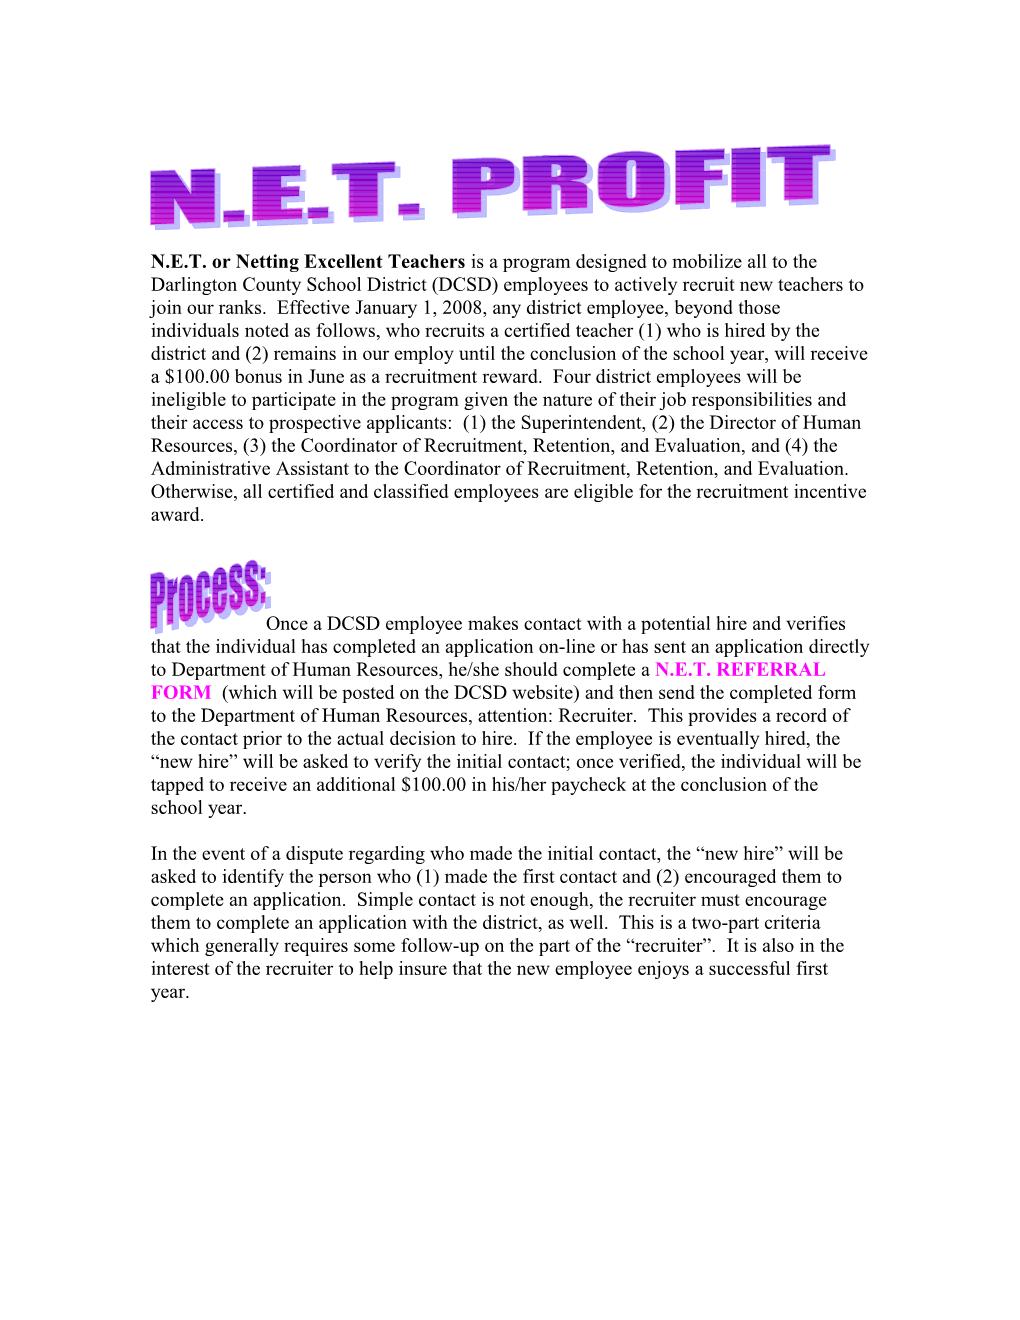 N.E.T. Referral Form*